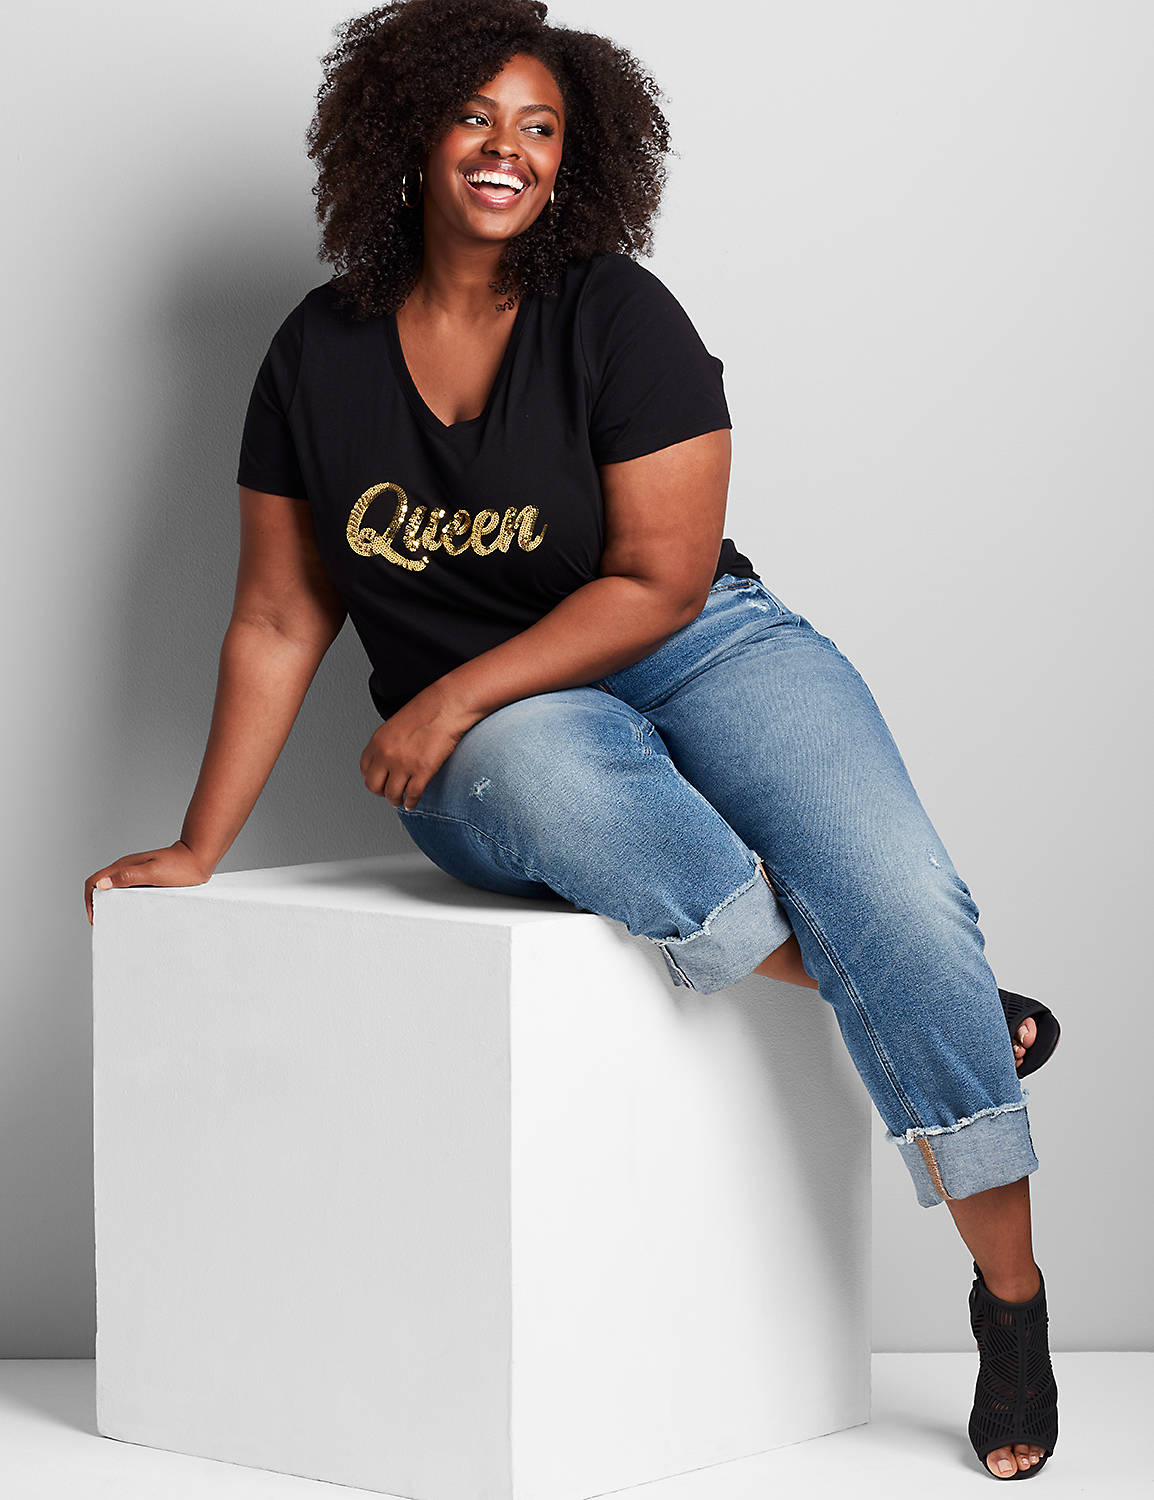 Short Sleeve VNeck Tee Graphic: Queen 1116341:Pitch Black LB 1000322:10/12 Product Image 3